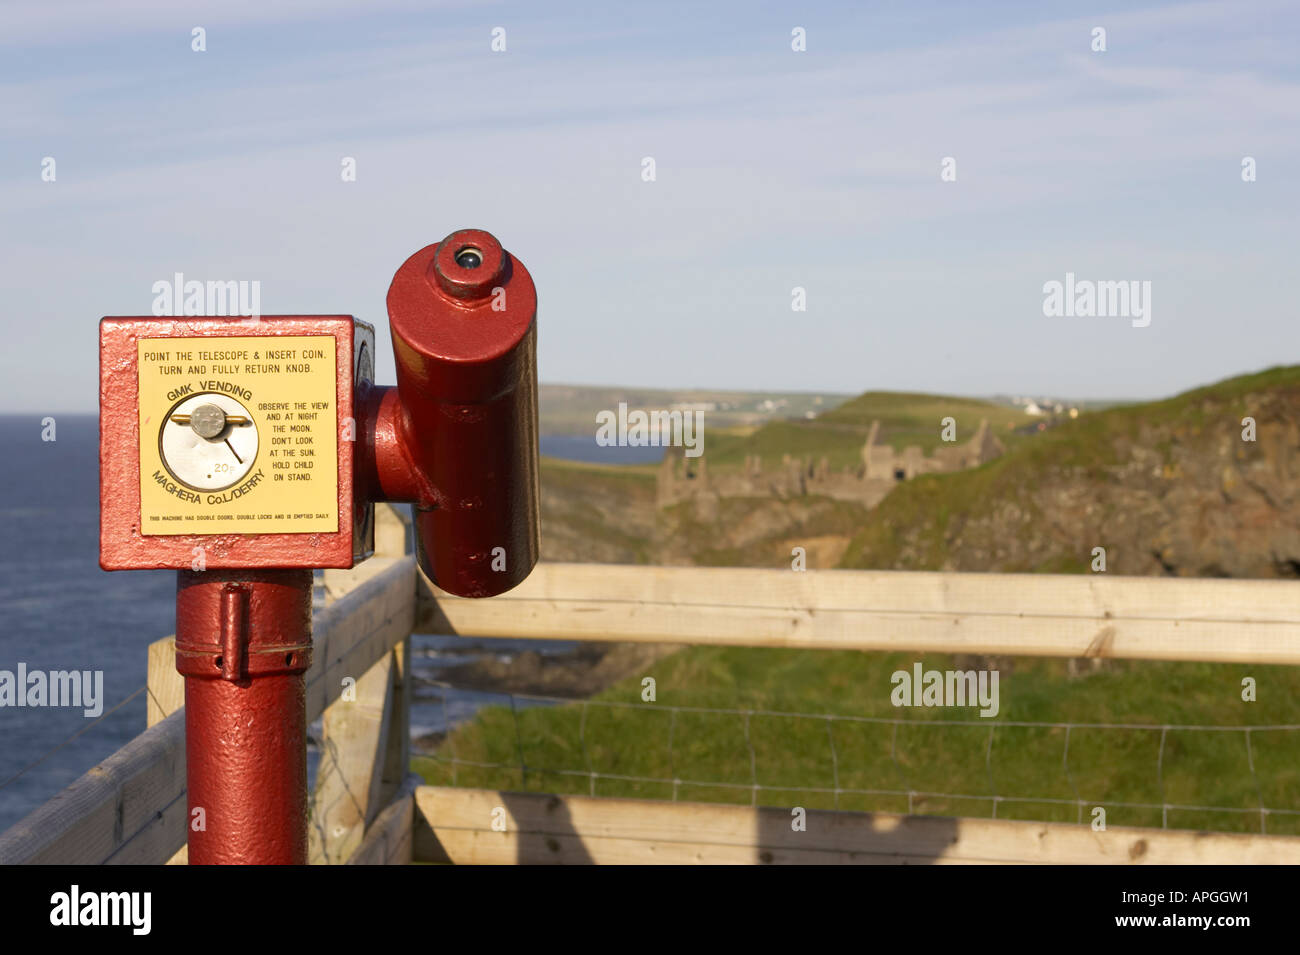 red and yellow pay per view coin operated telescope for tourists looking towards dunluce castle county antrim northern ireland Stock Photo